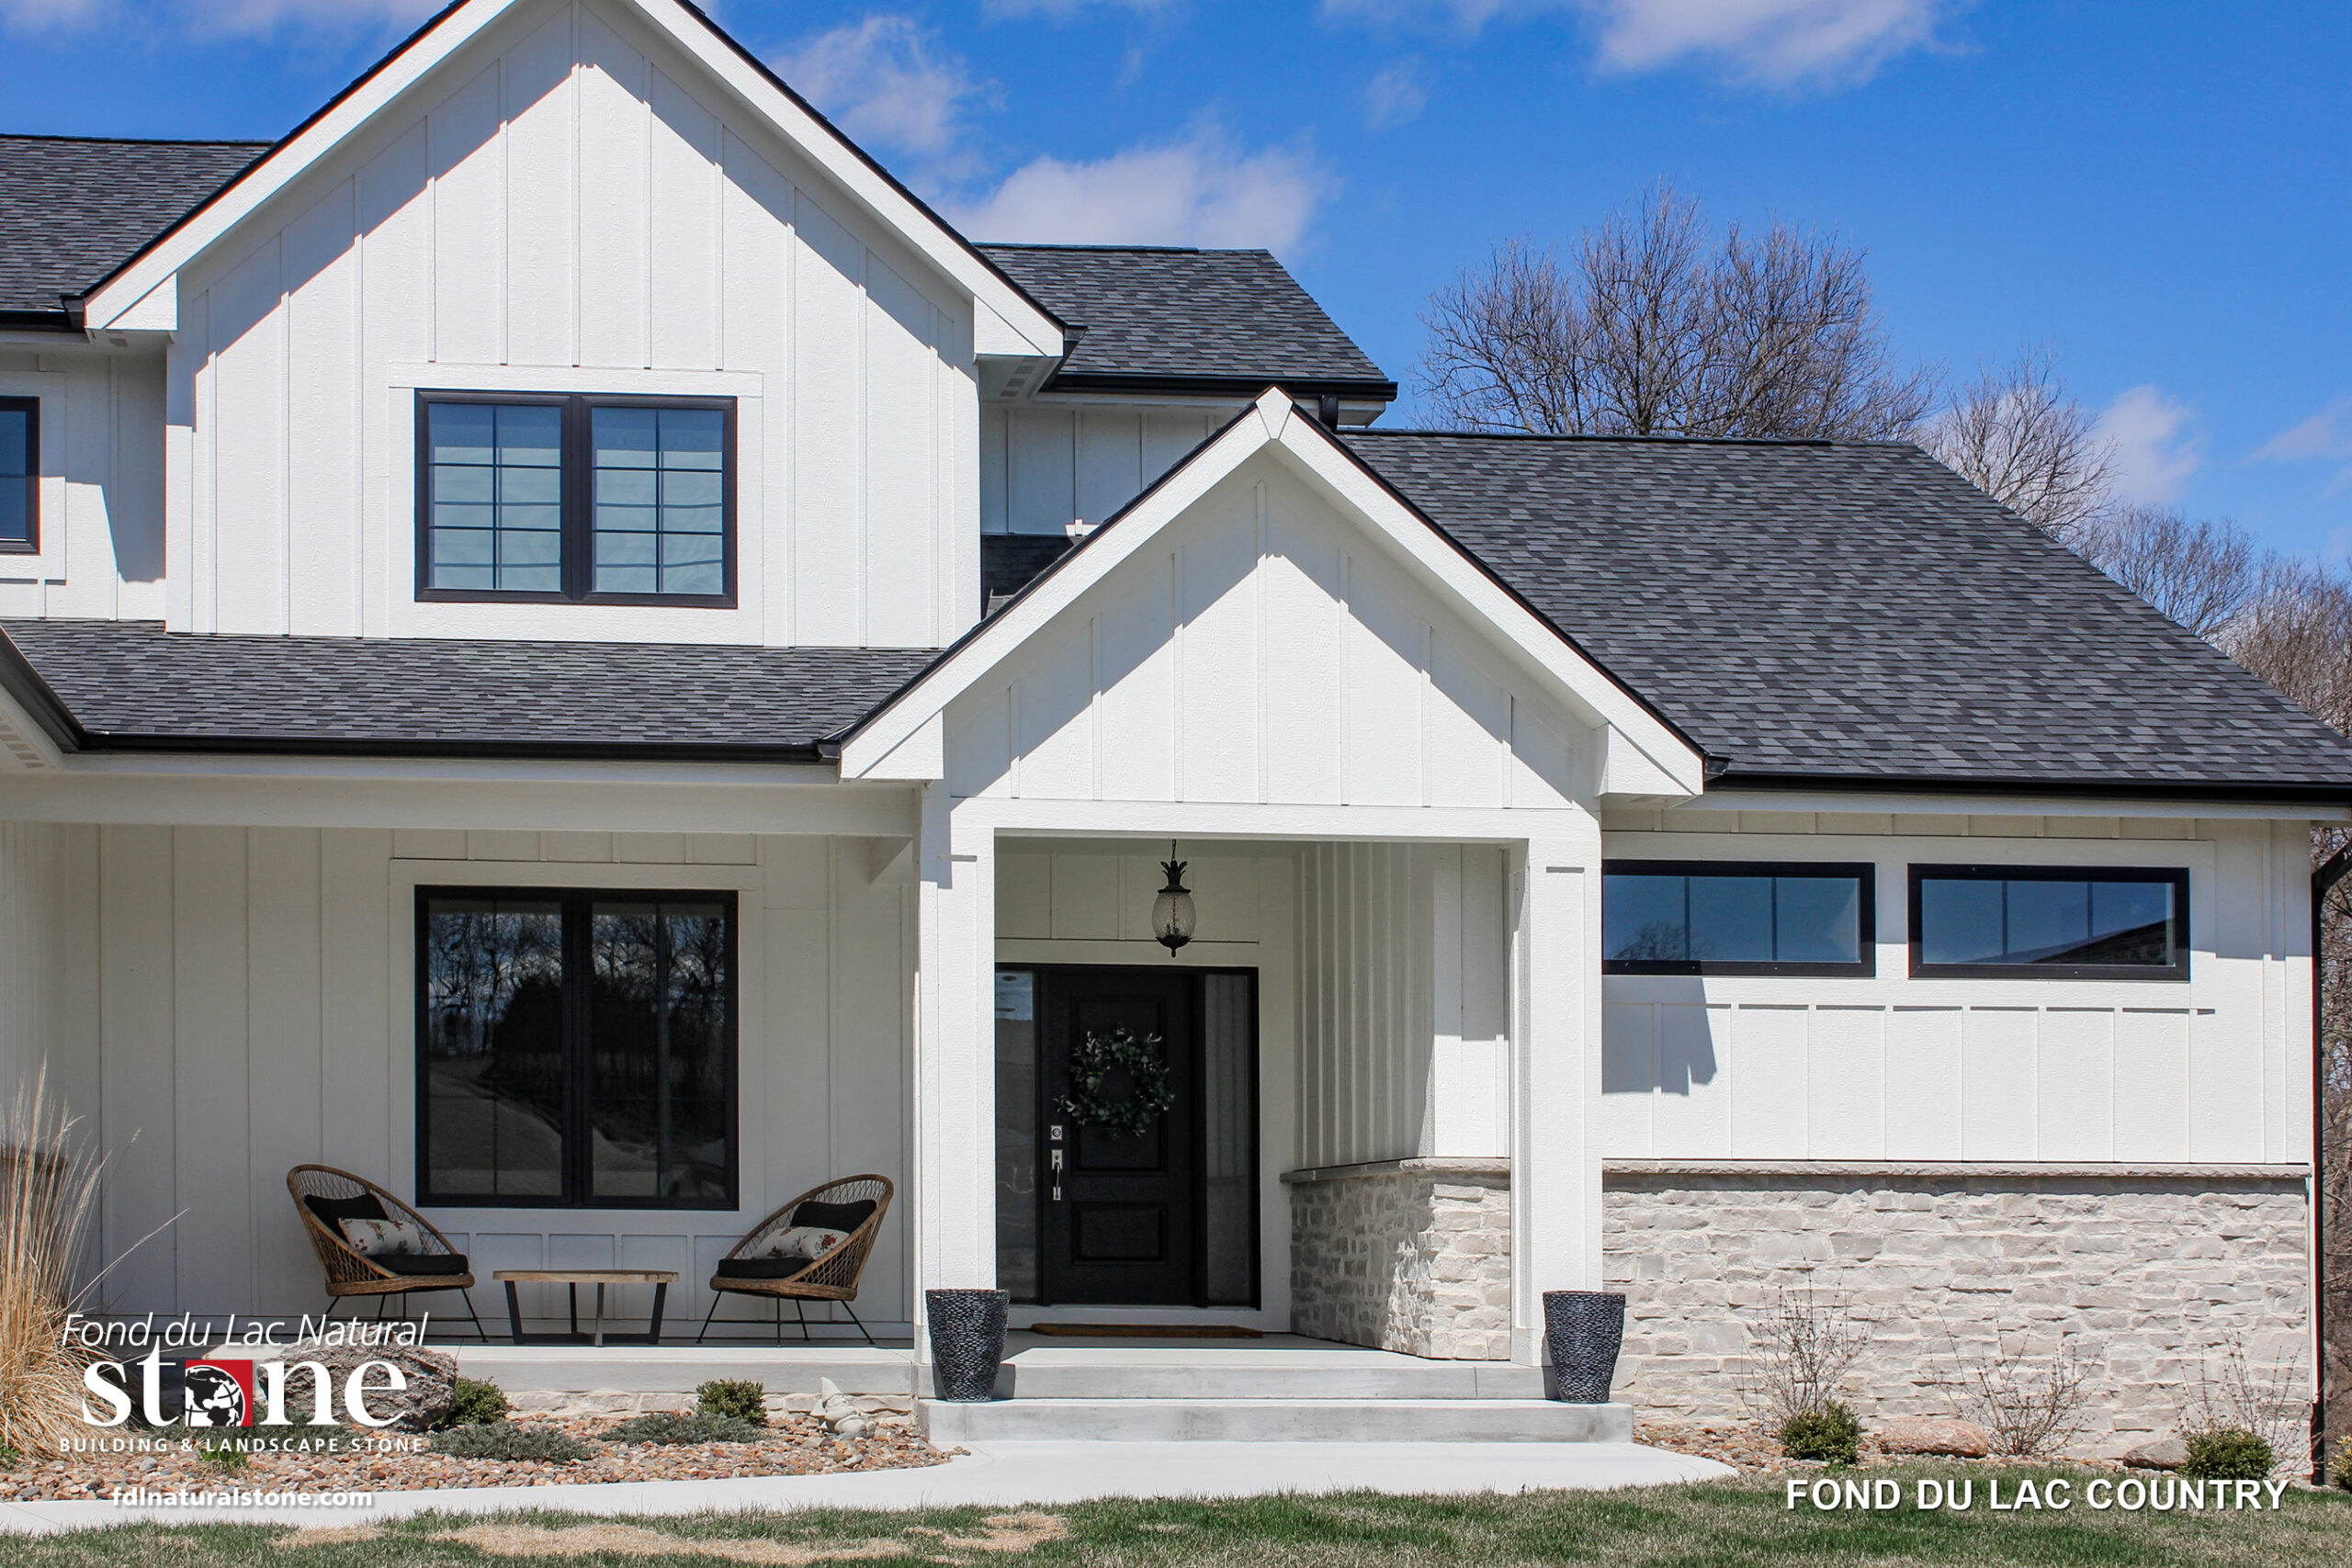 Fond du Lac Country - Residential Exterior 3 - Fond du Lac Natural Stone